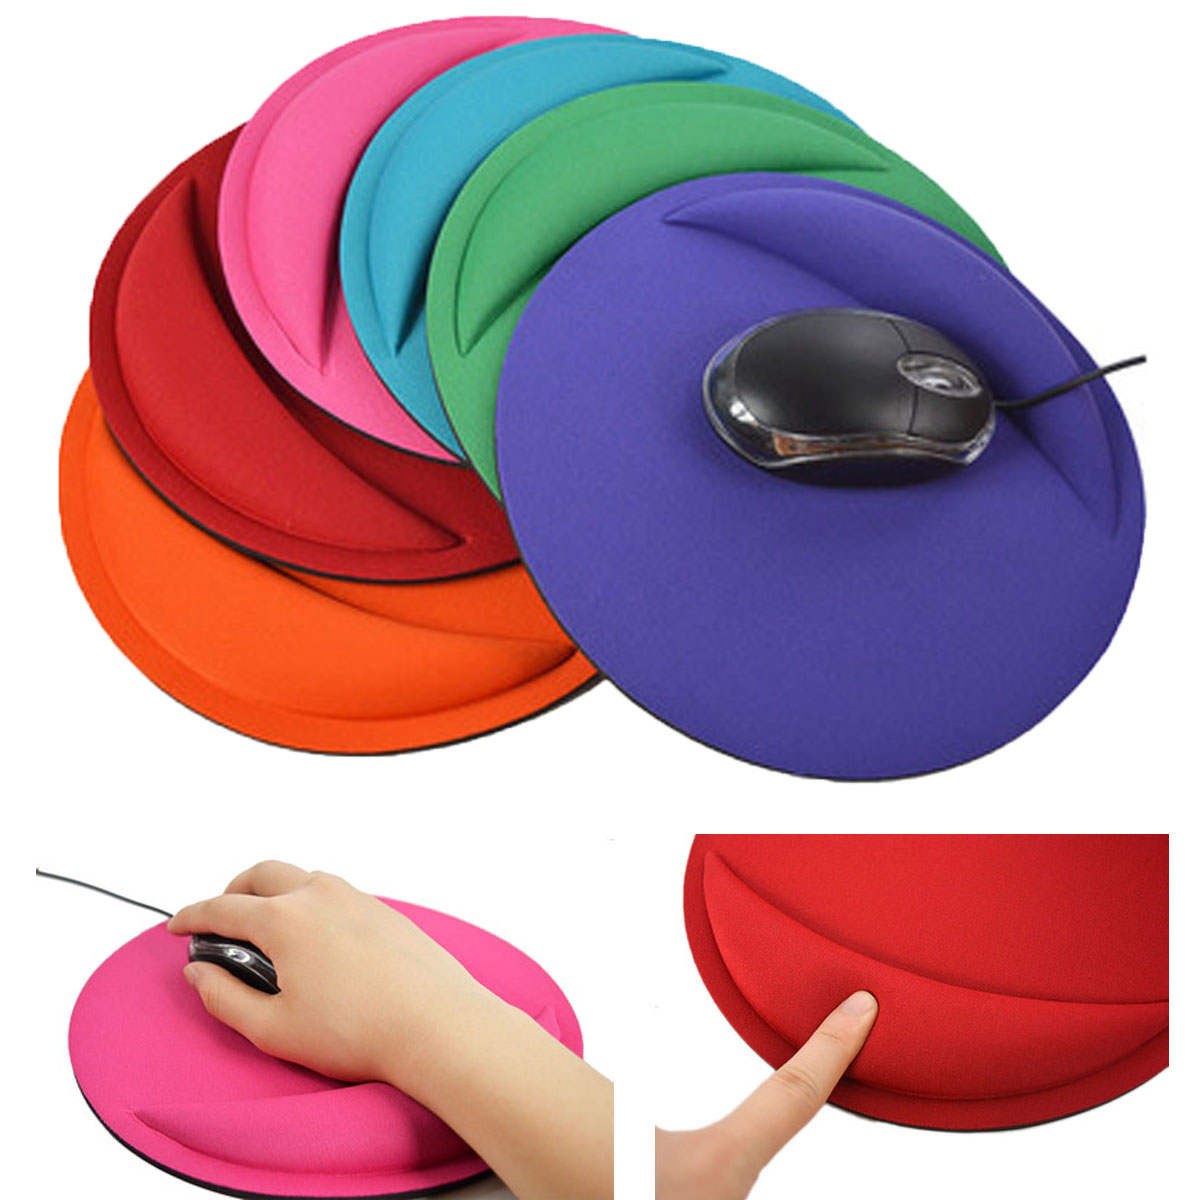 GL-AKL0102 Round Mouse Pad with Wrist Protect